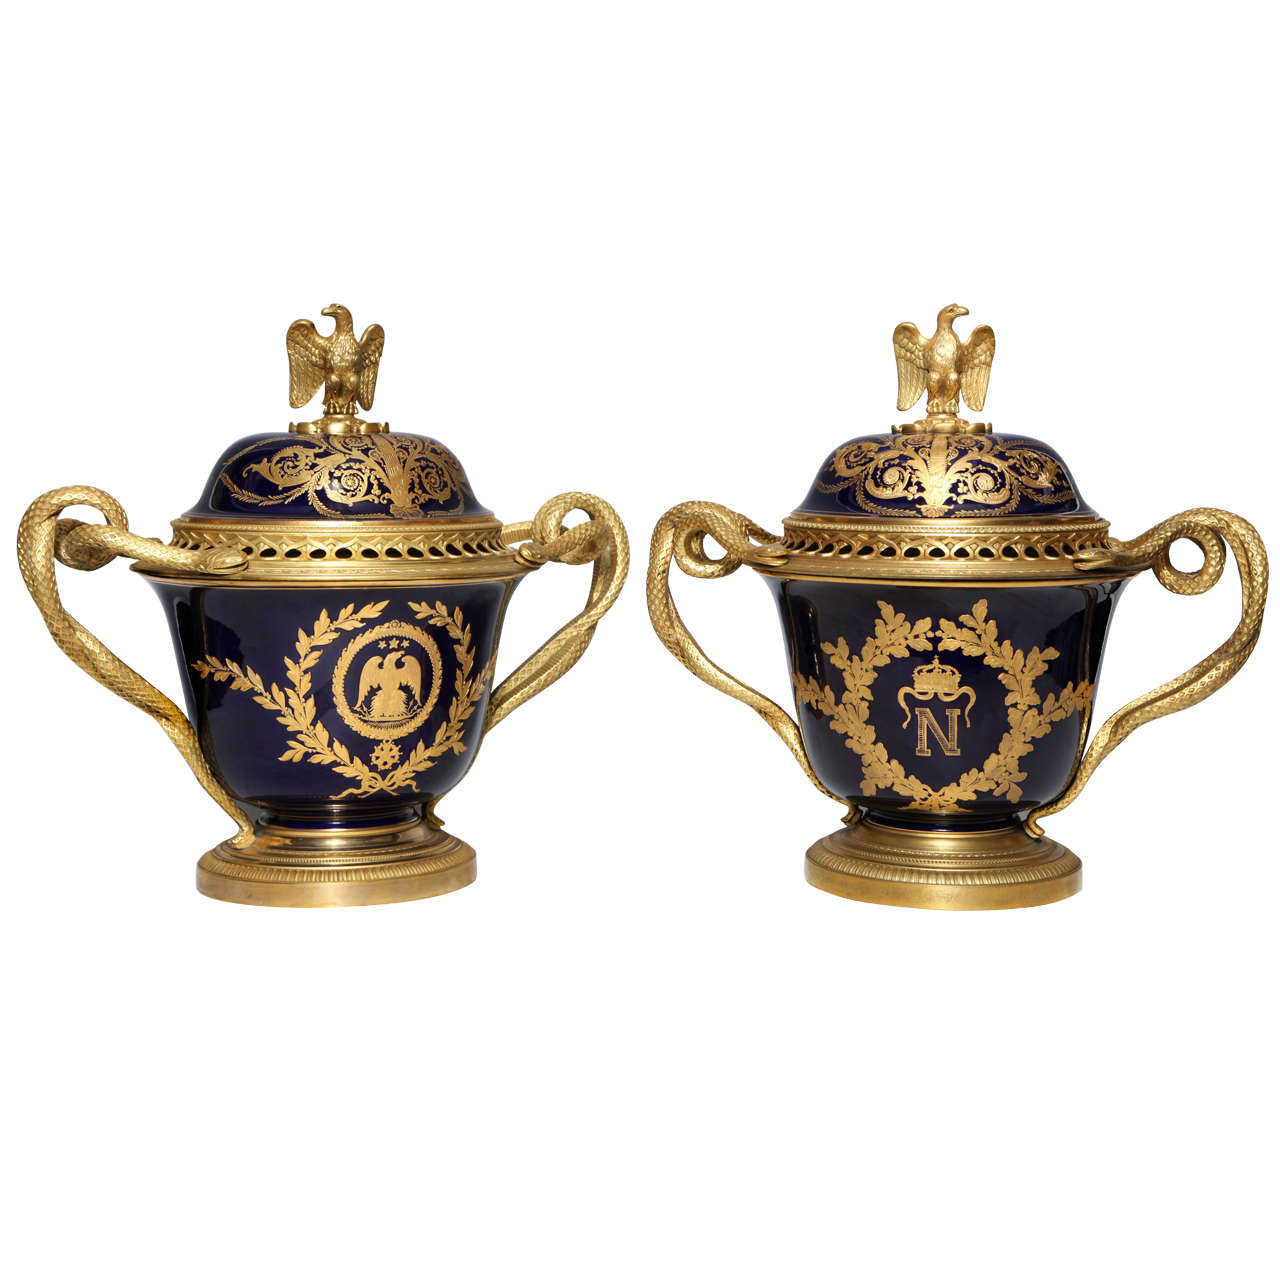 Pair of French Napoleanic Sèvres Porcelain and Ormolu Covered Vases/Pot Pourries